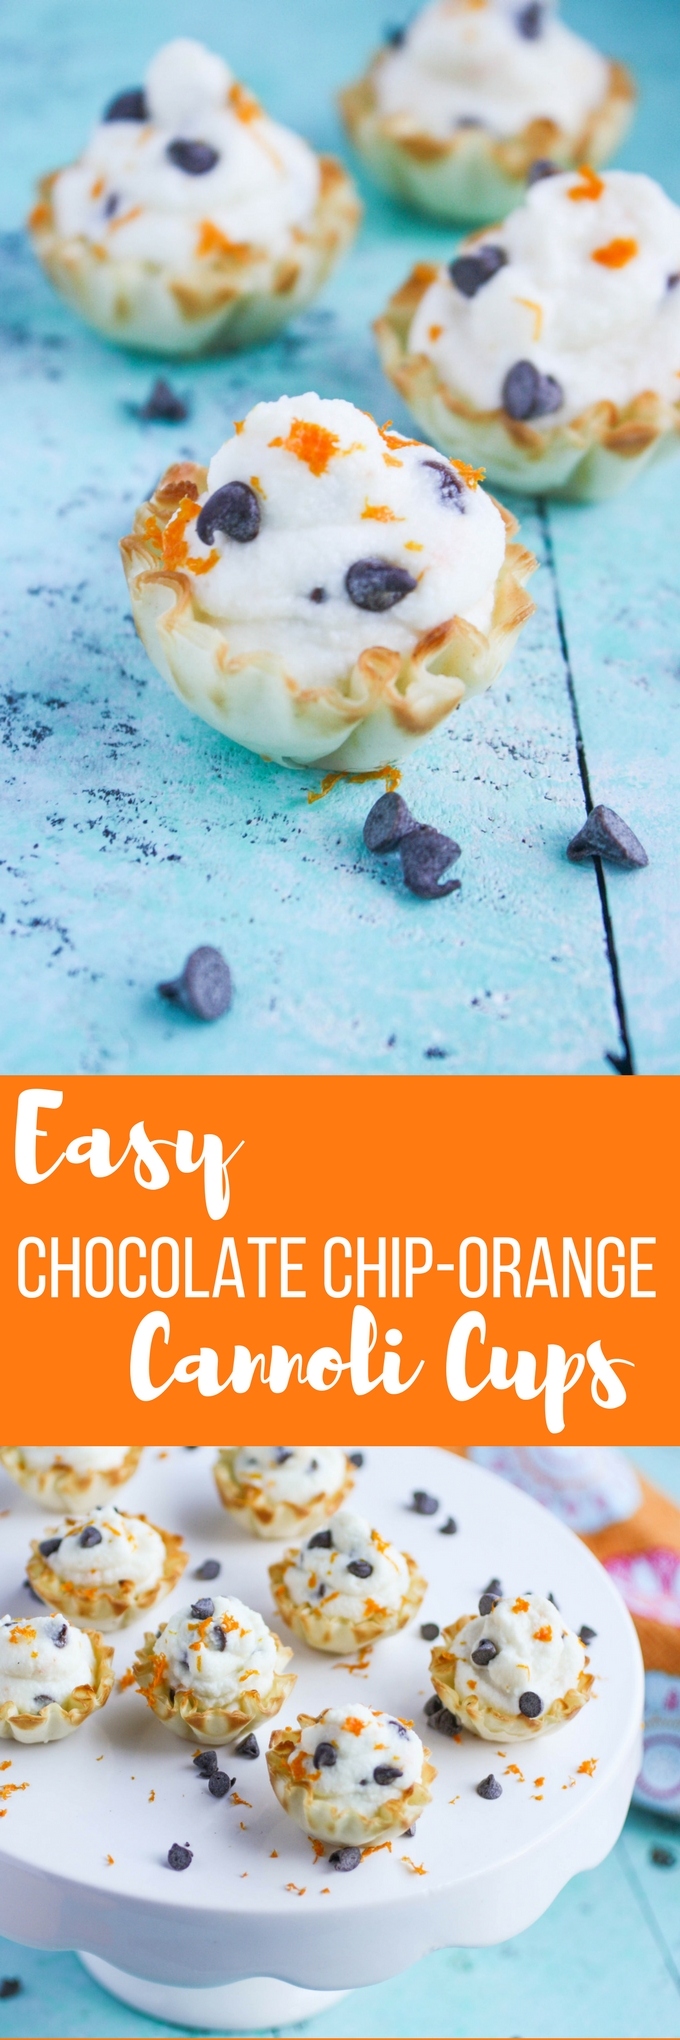 Easy Chocolate Chip-Orange Cannoli Cups are a tasty treat for any celebration! You'll love how easy these cannoli cups are to make!